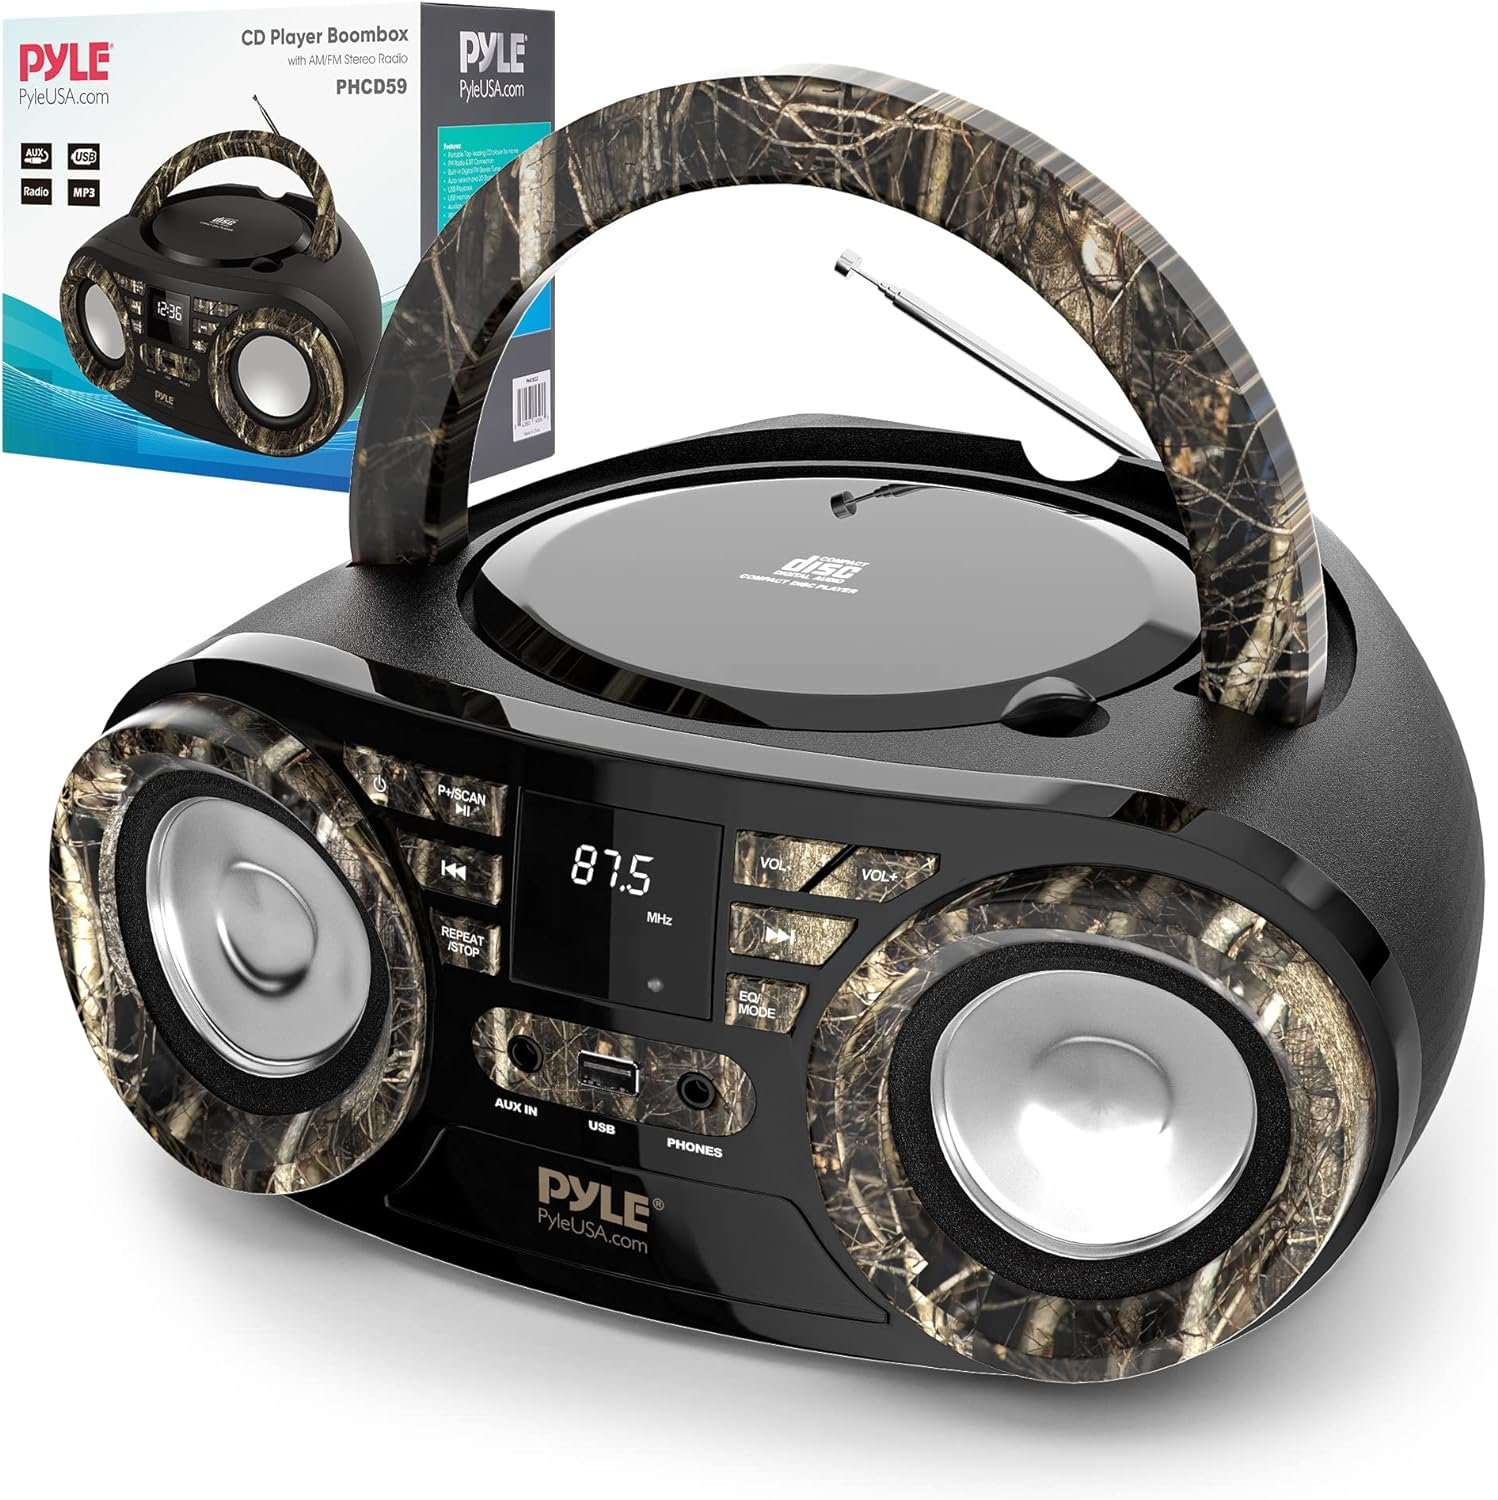 Pyle Portable CD Player Boombox Speaker Review